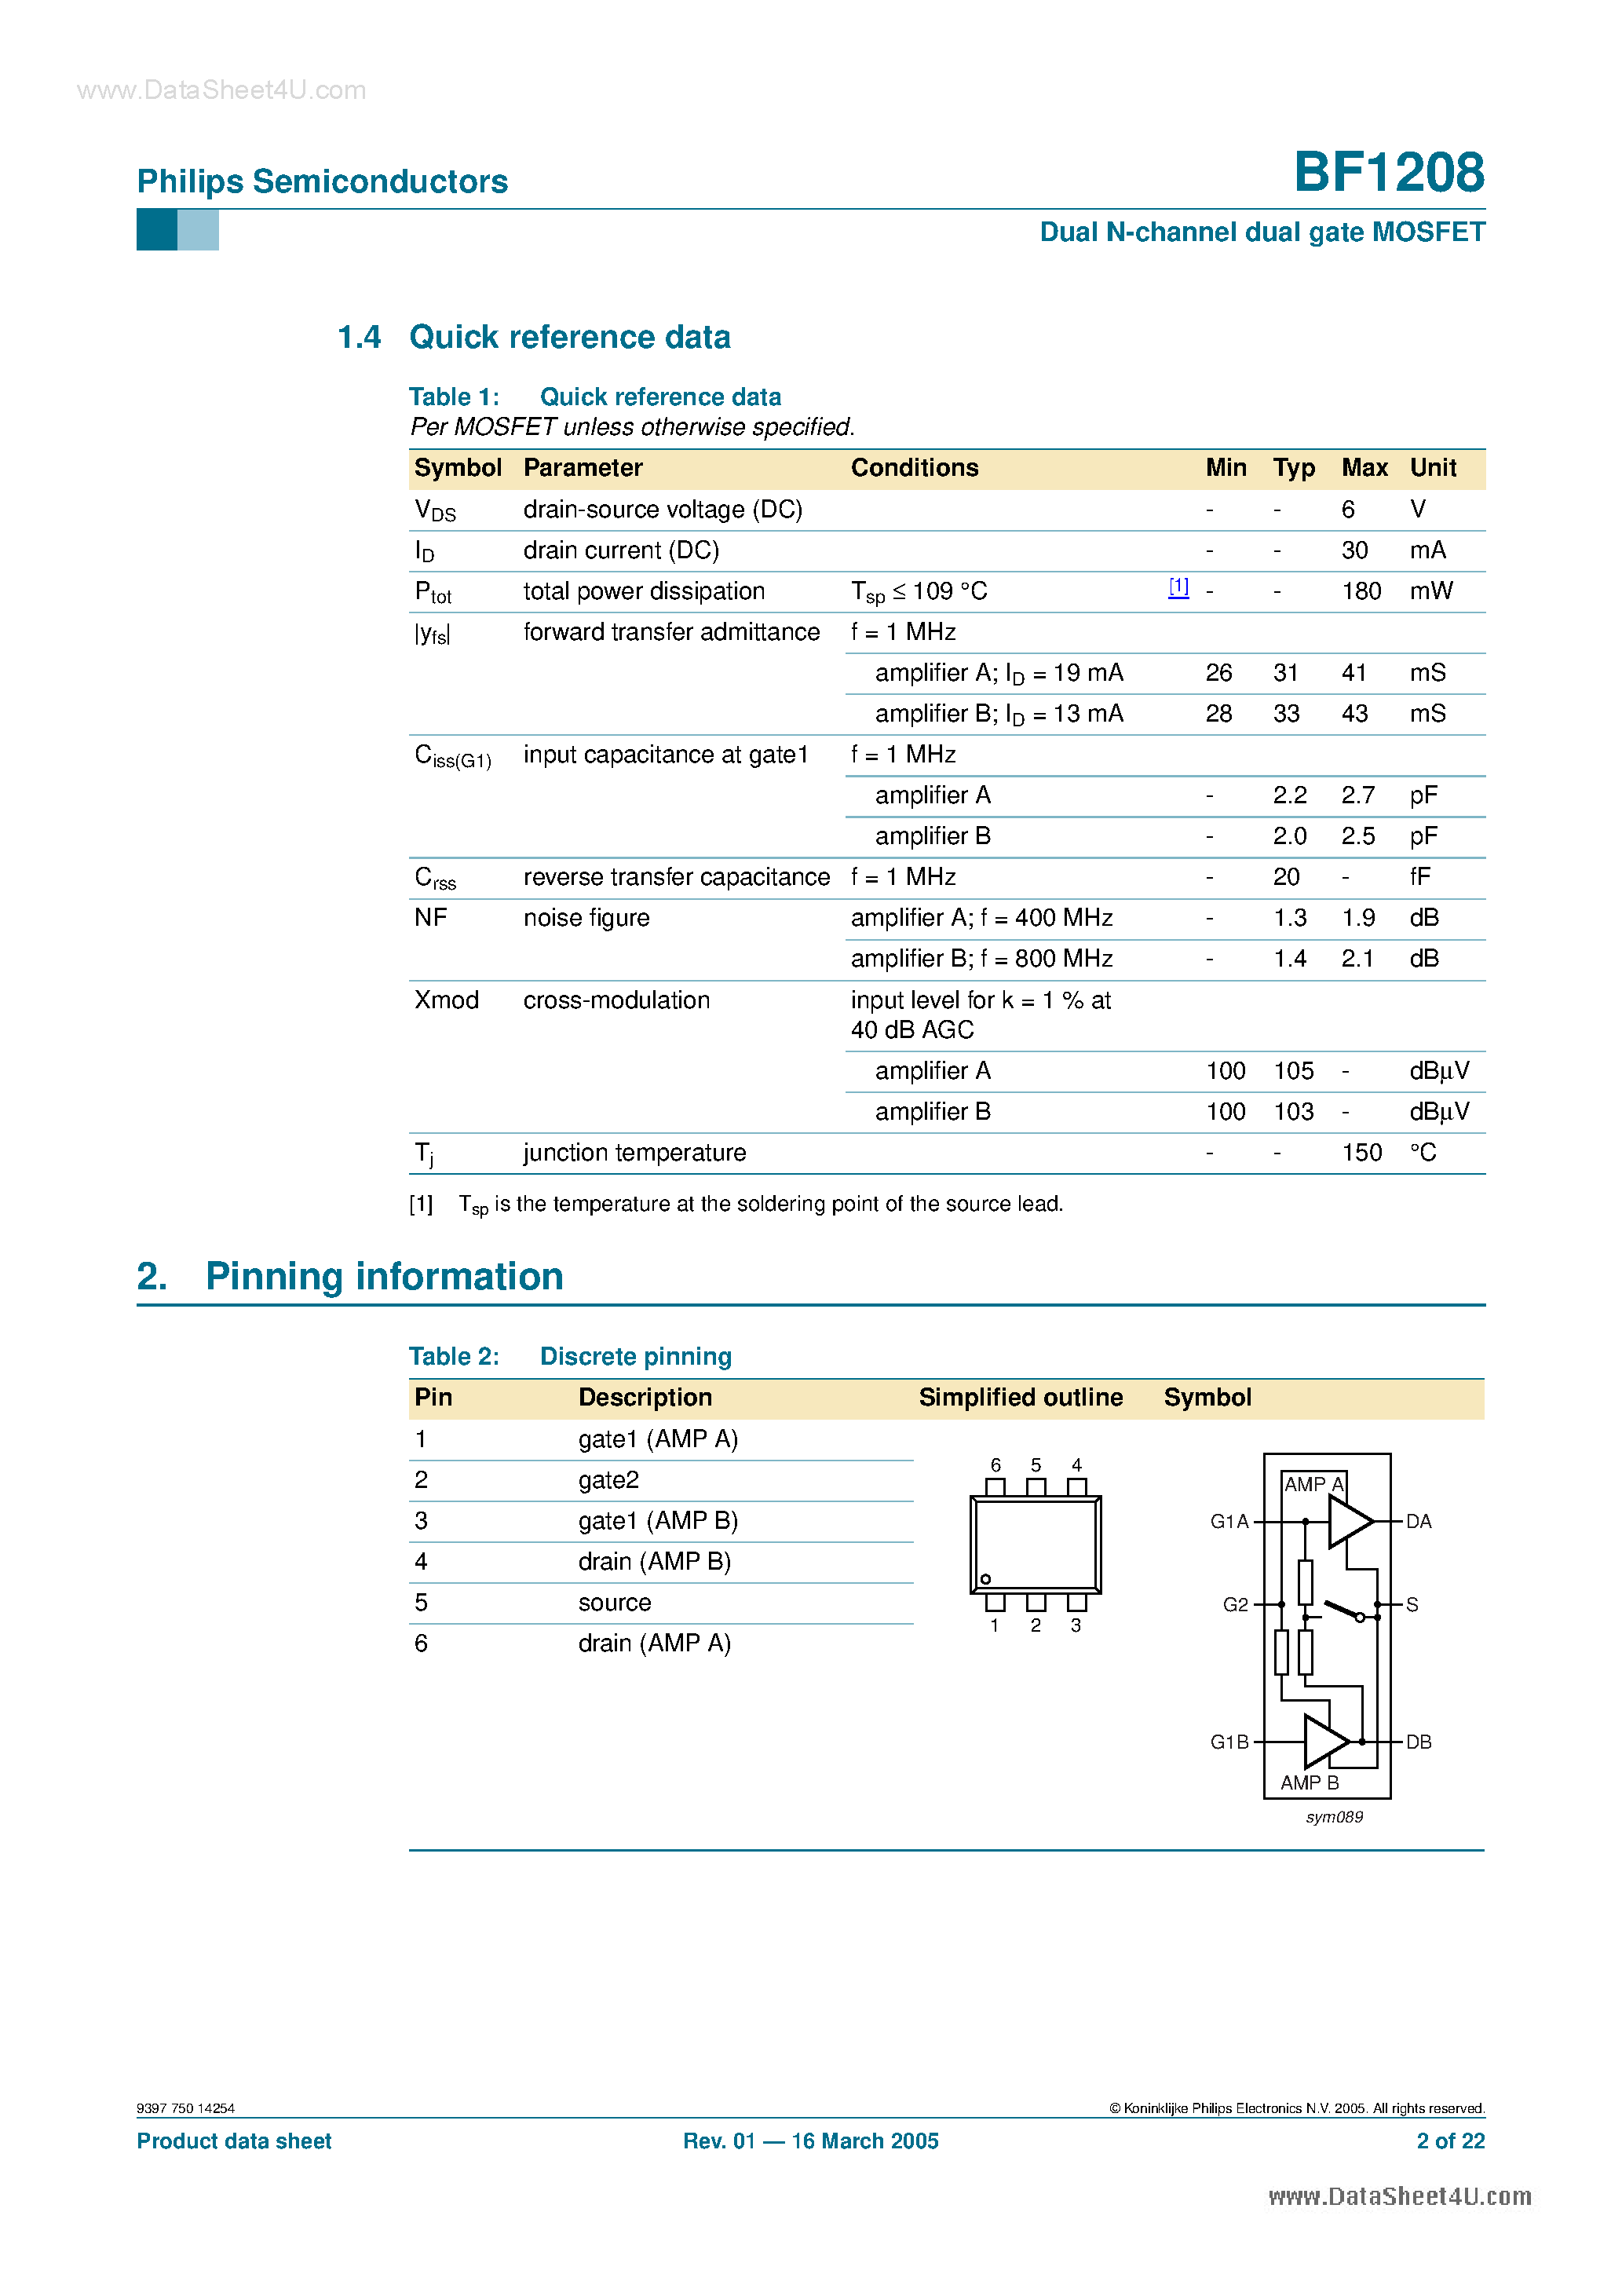 Datasheet BF1208 - Dual N-channel dual gate MOSFET page 2